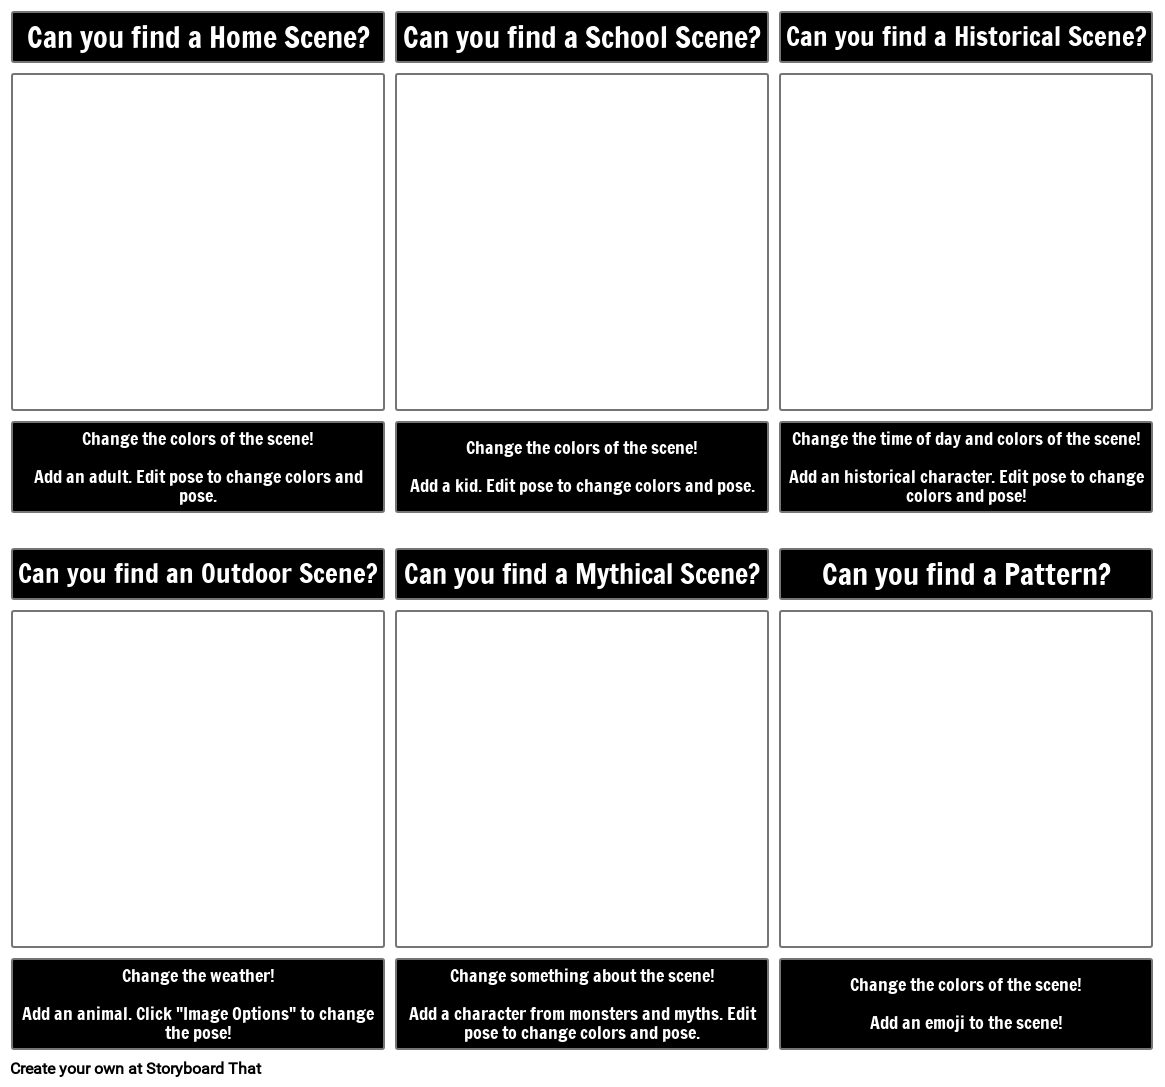 scavenger-hunt-of-the-storyboard-creator-6-cells-storyboard-that